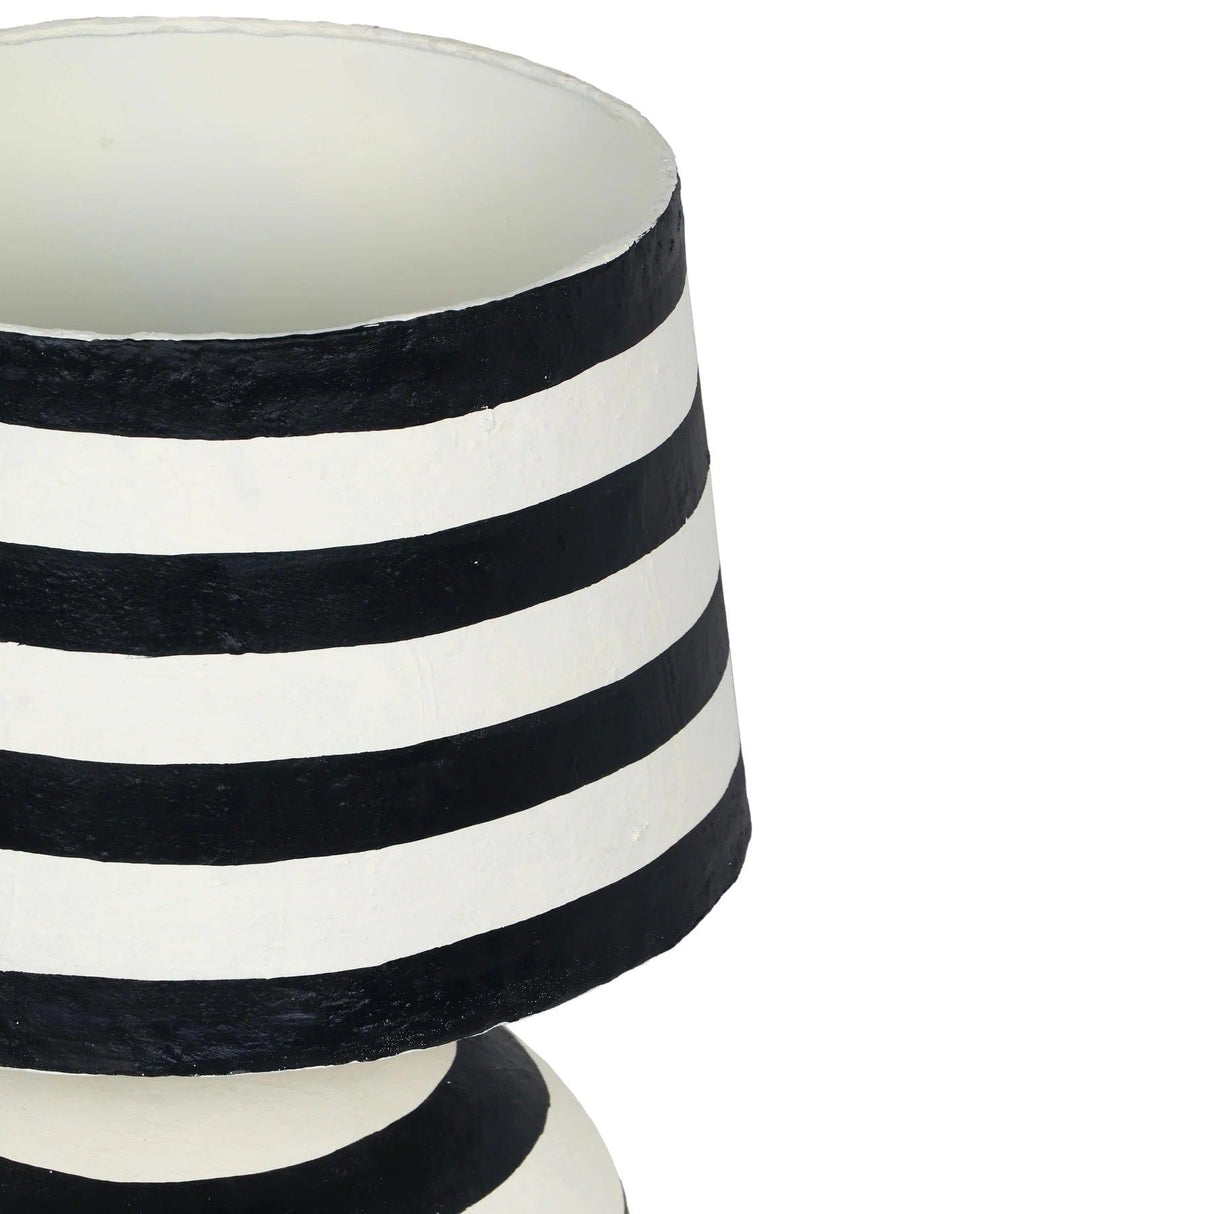 Lighting by BLU Positano Striped Papier Mache Table Lamp Table Lamps